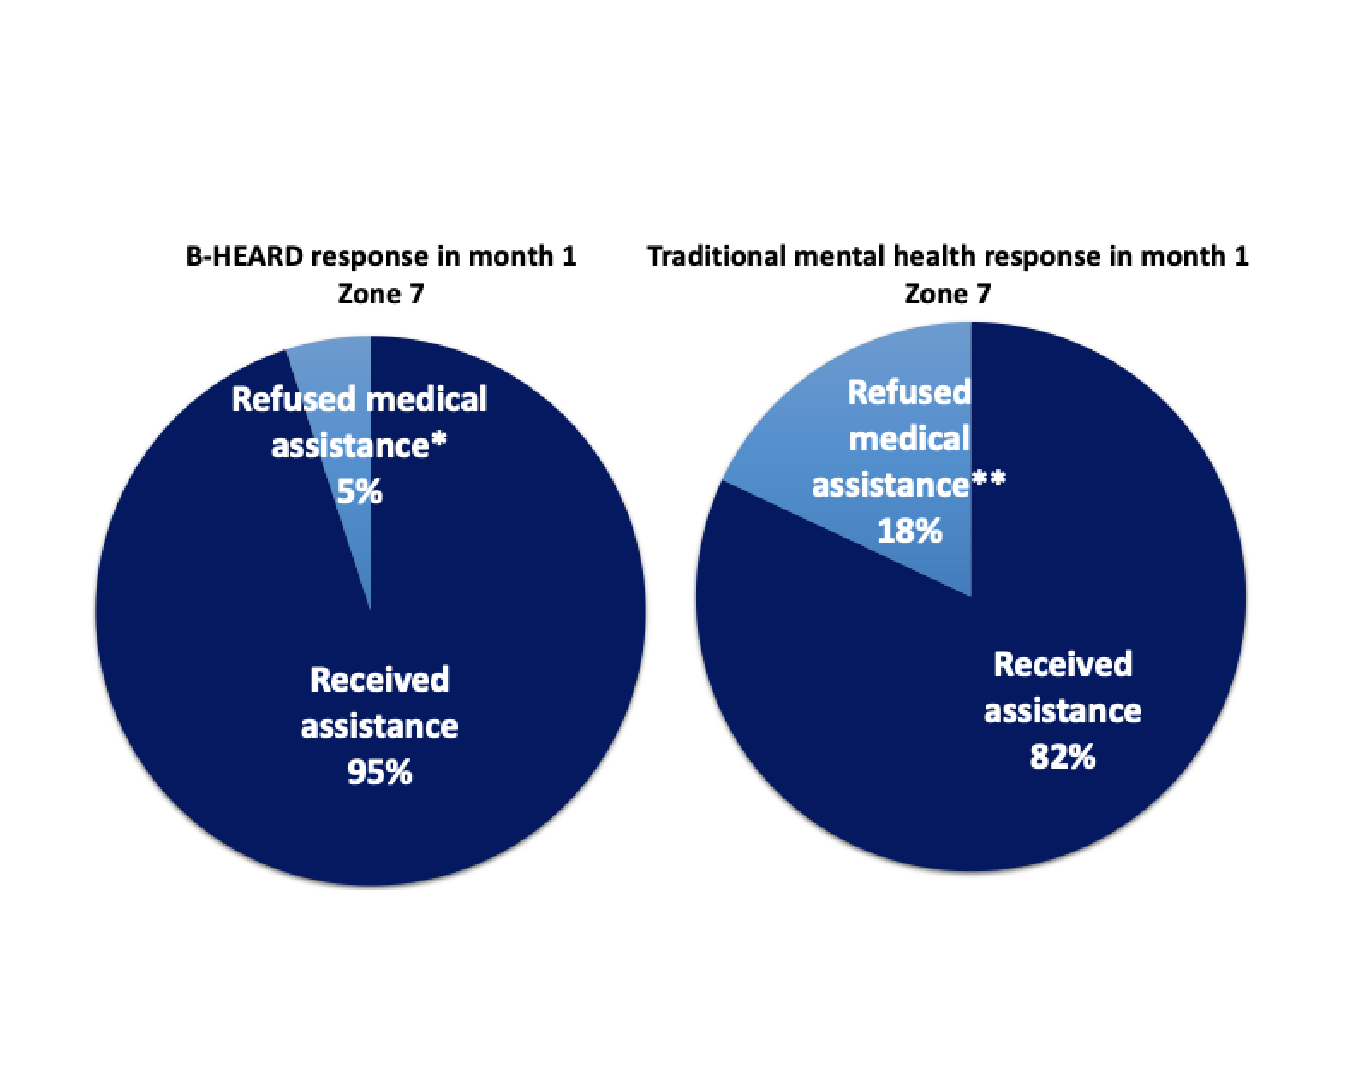 Two pie charts display data on B-HEARD response compared to traditional mental health response